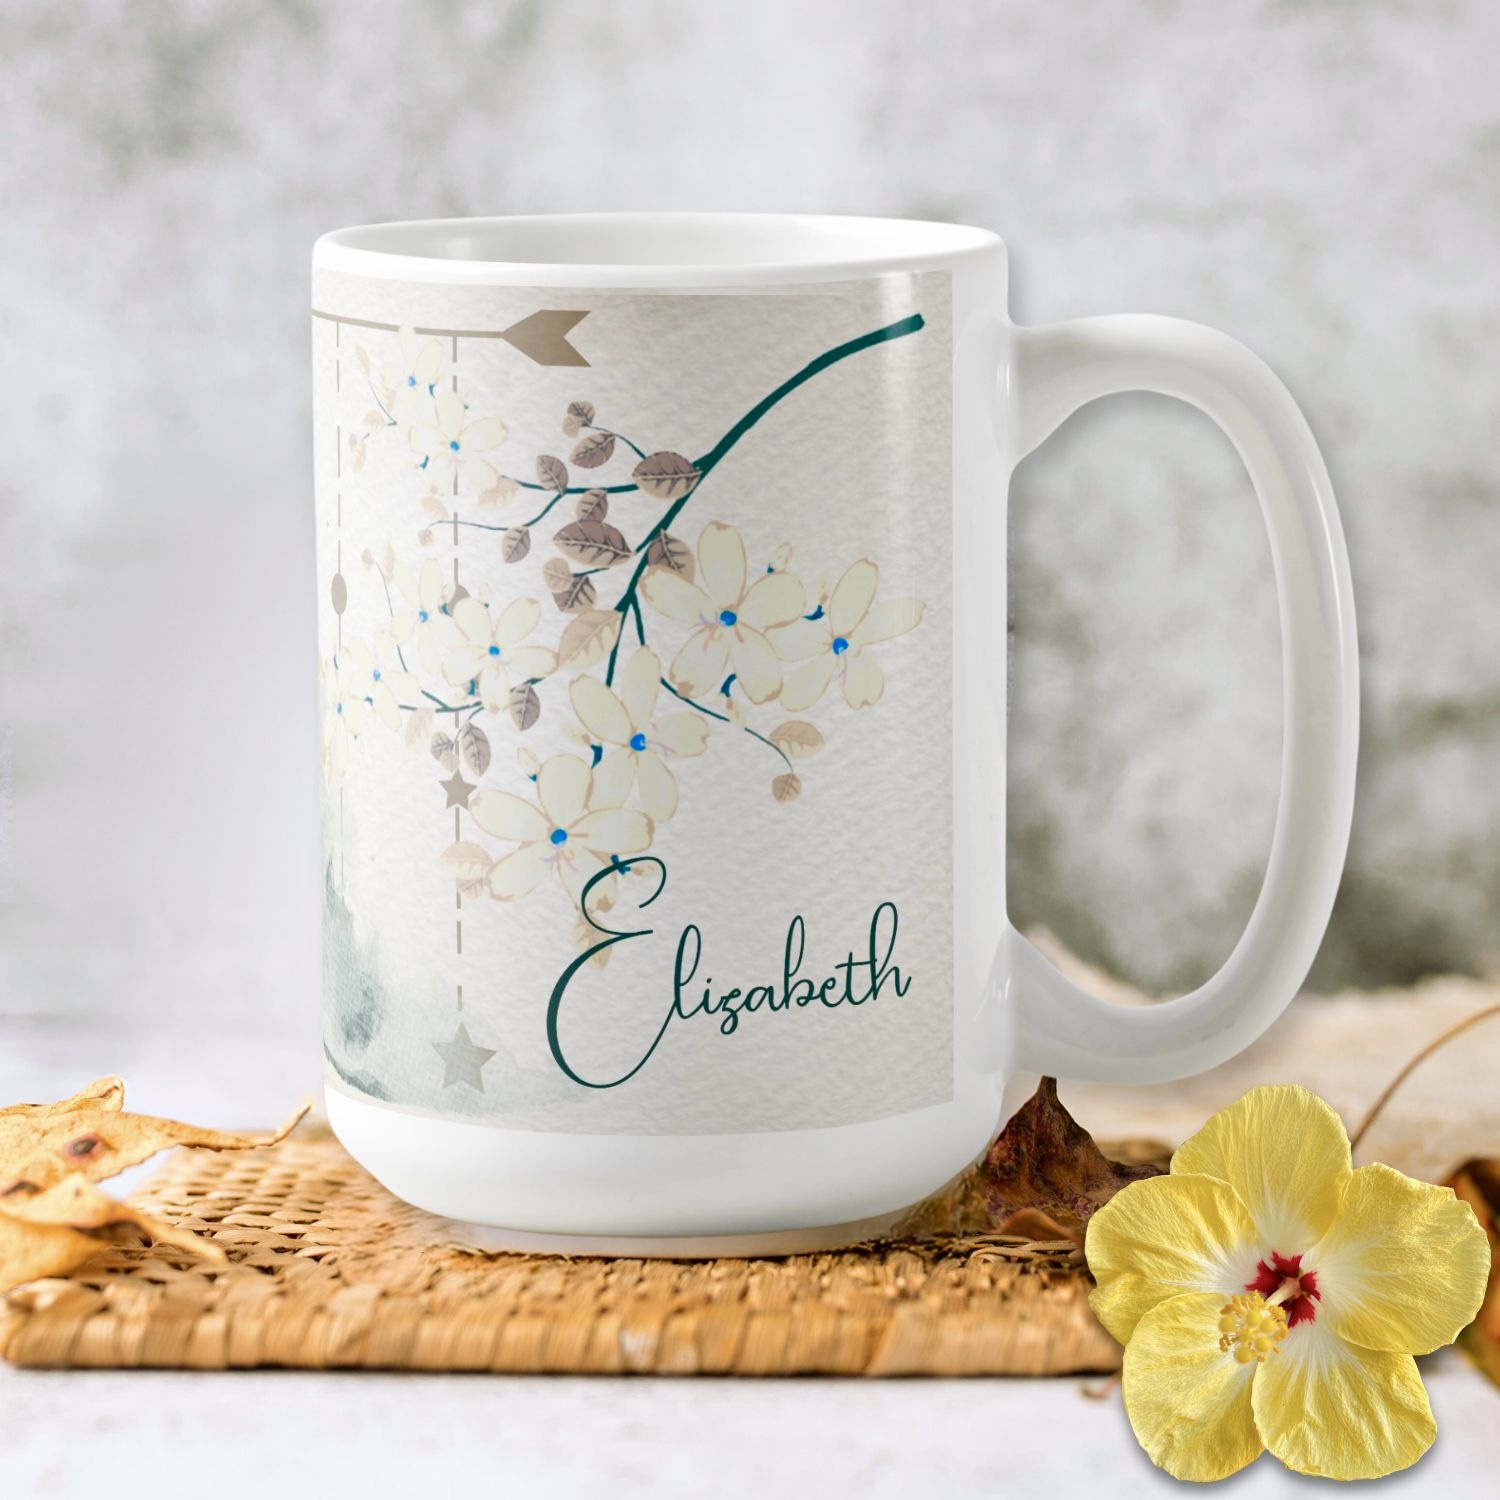 Tranquil Moonlit Flowers Mug featuring soothing earthy tones and delicate floral motifs, perfect for enjoying serene moments.